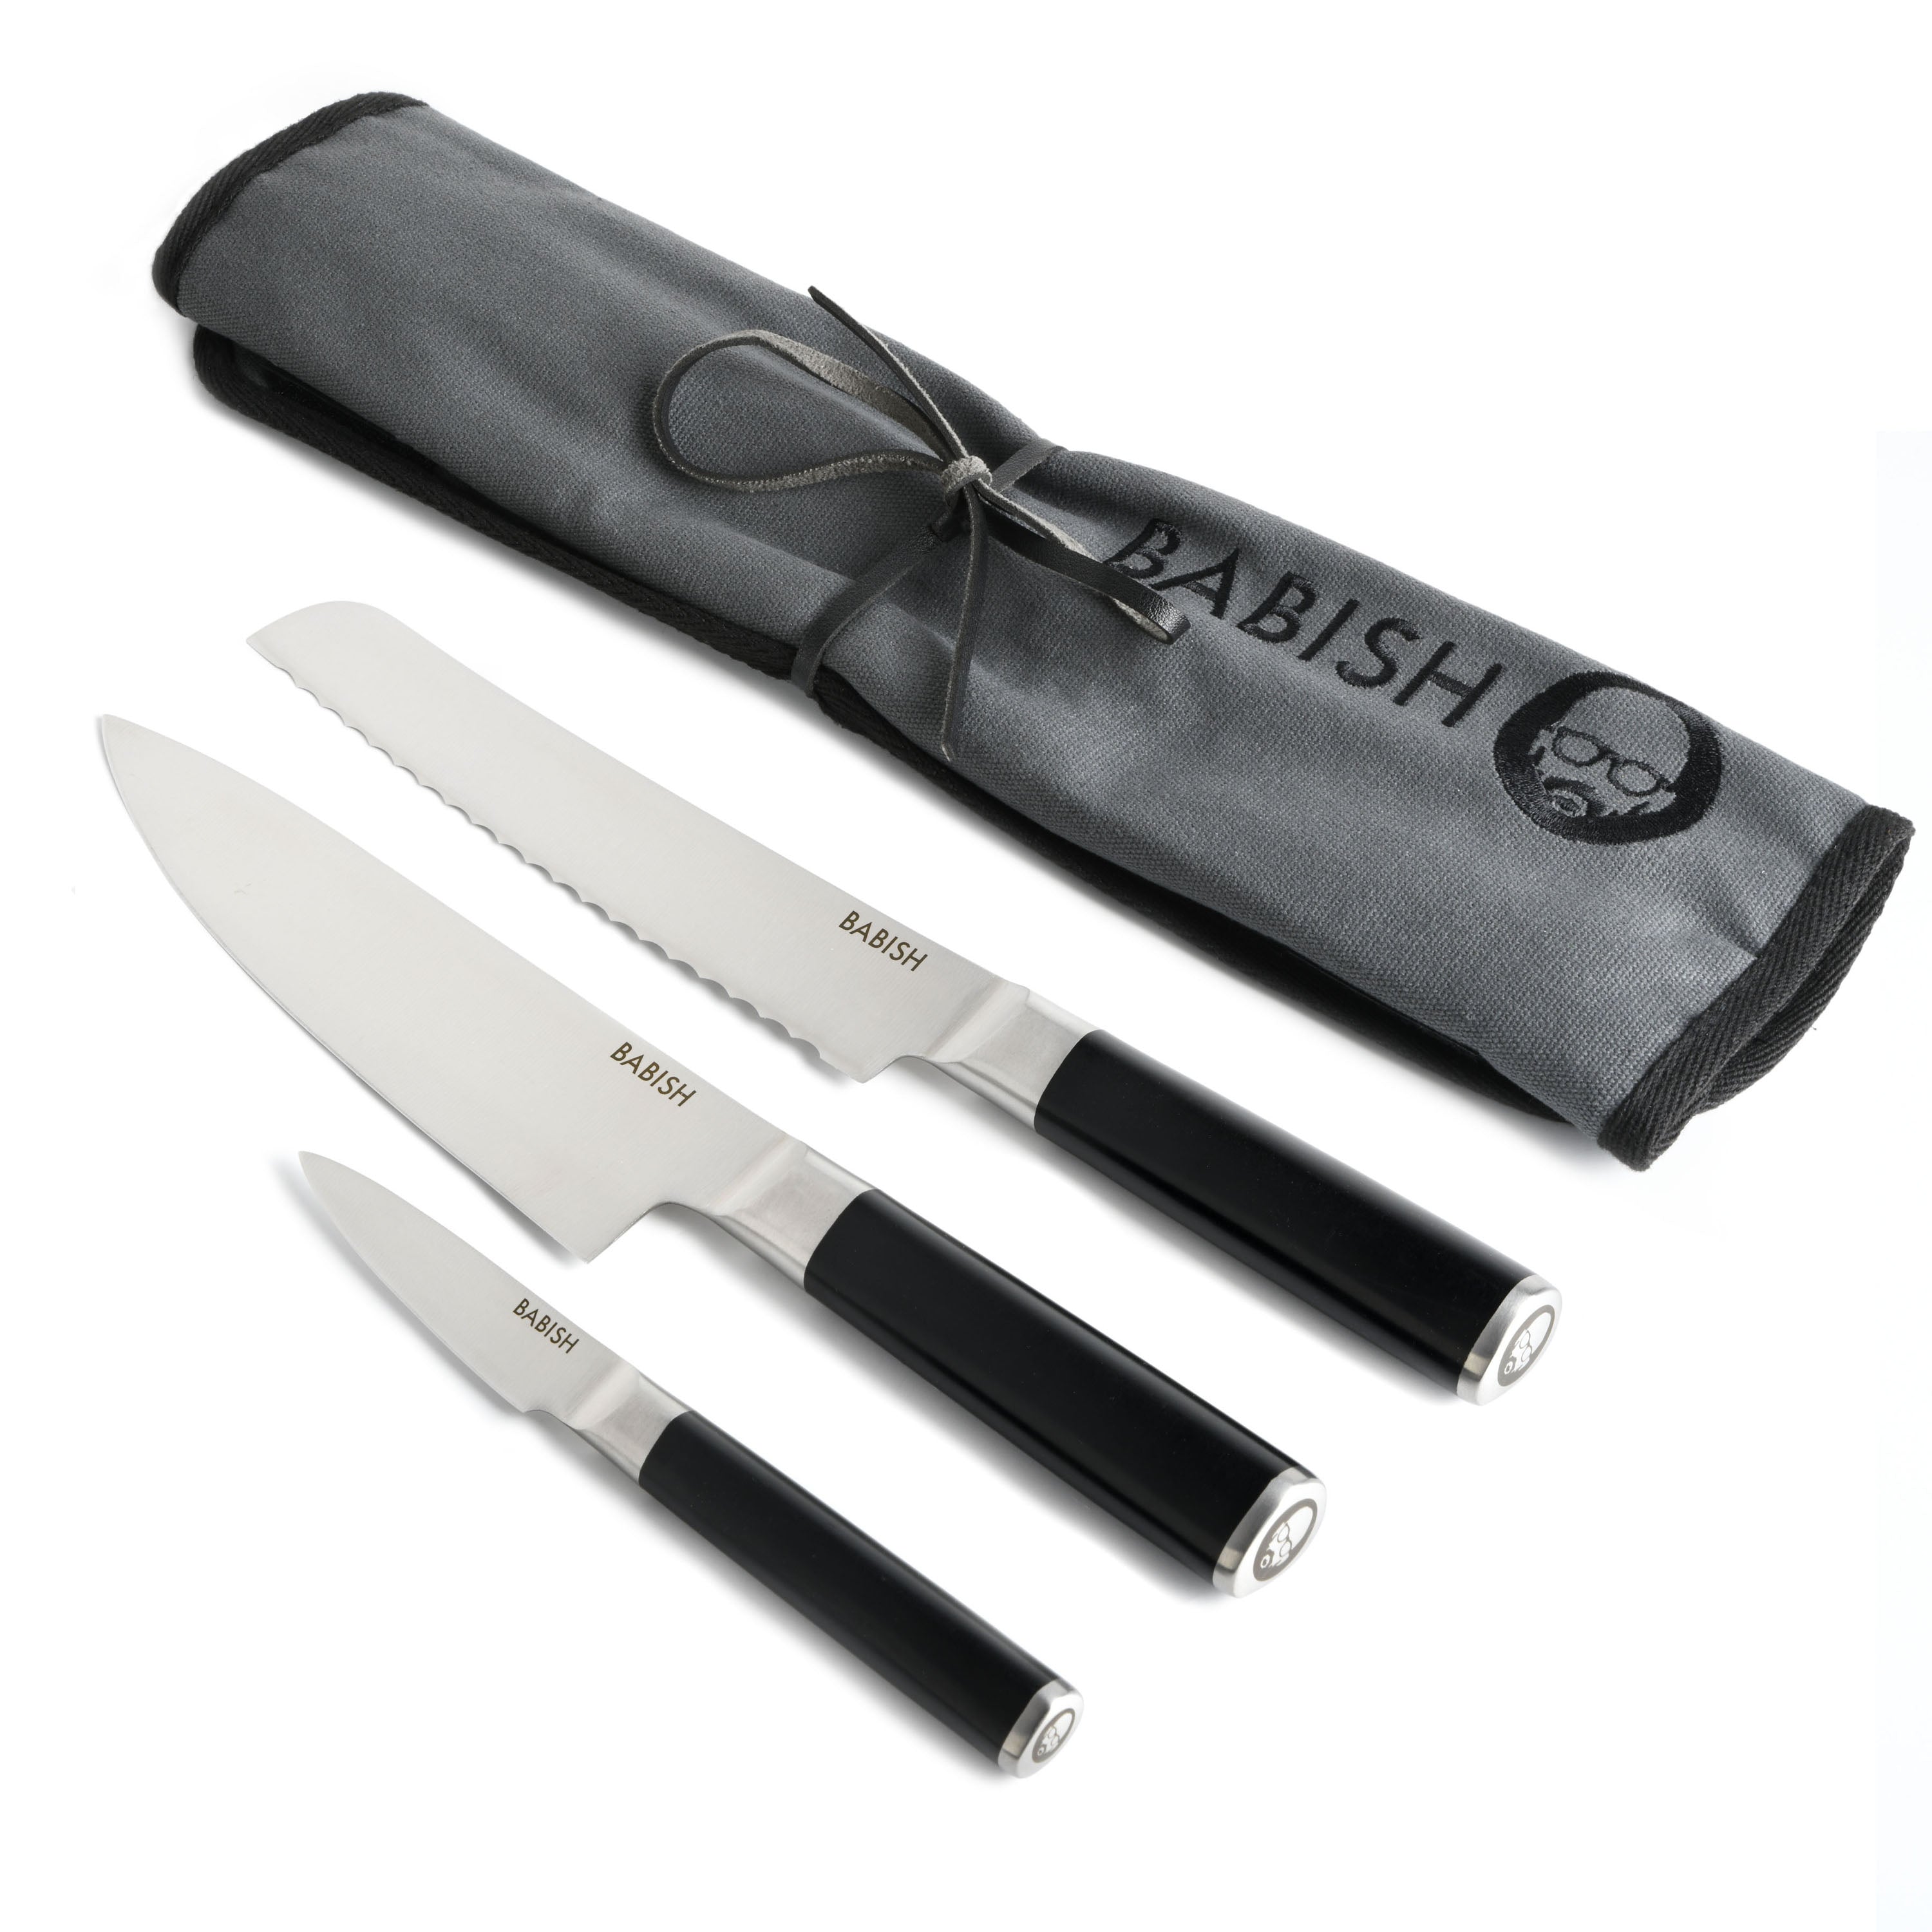 Babish High-Carbon 1.4116 German Steel 3-Piece Cutlery Set (Chef Knife, Bread Knife, & Pairing Knife) w/Knife Roll